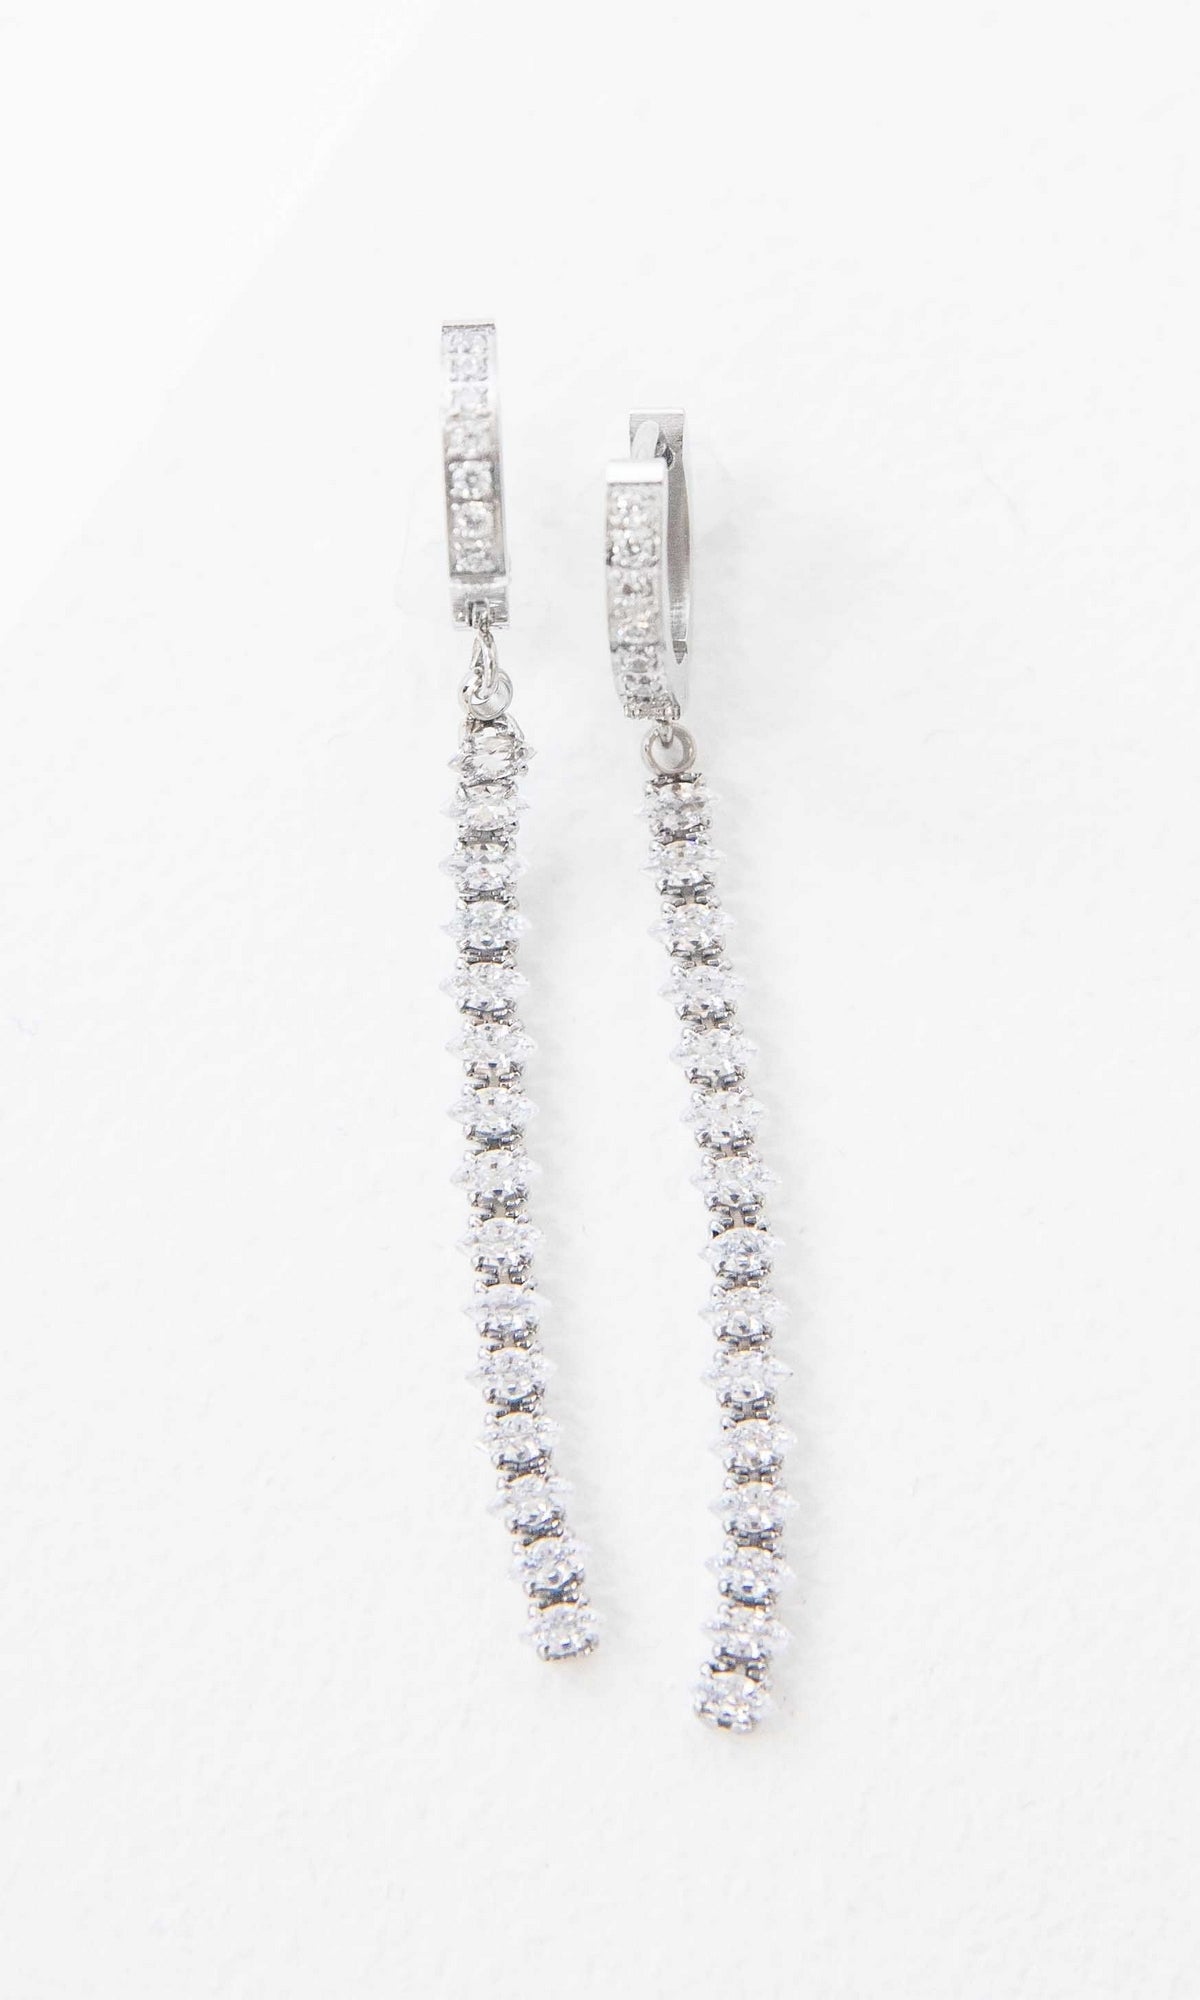 Small Silver Hoop Earrings With Stone Strands